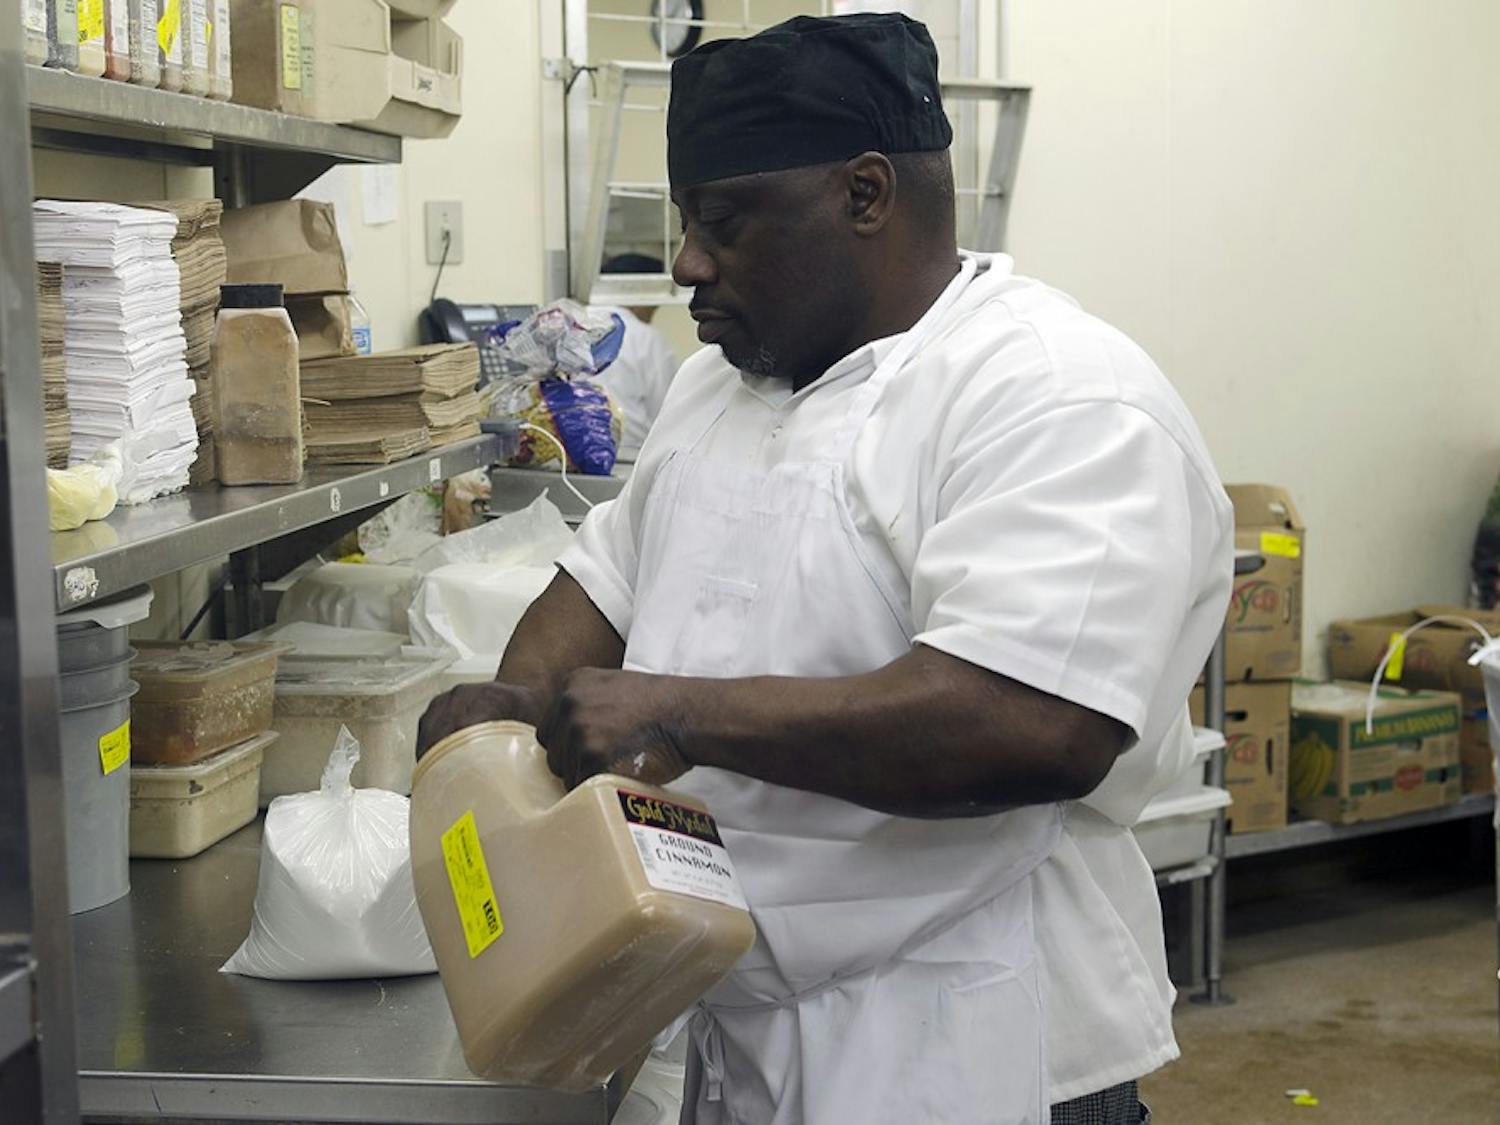 After being released from prison, Jimmy “Moe” Penny was hired at K&amp;W Cafeterias. He started his job there while he served eight years in prison.